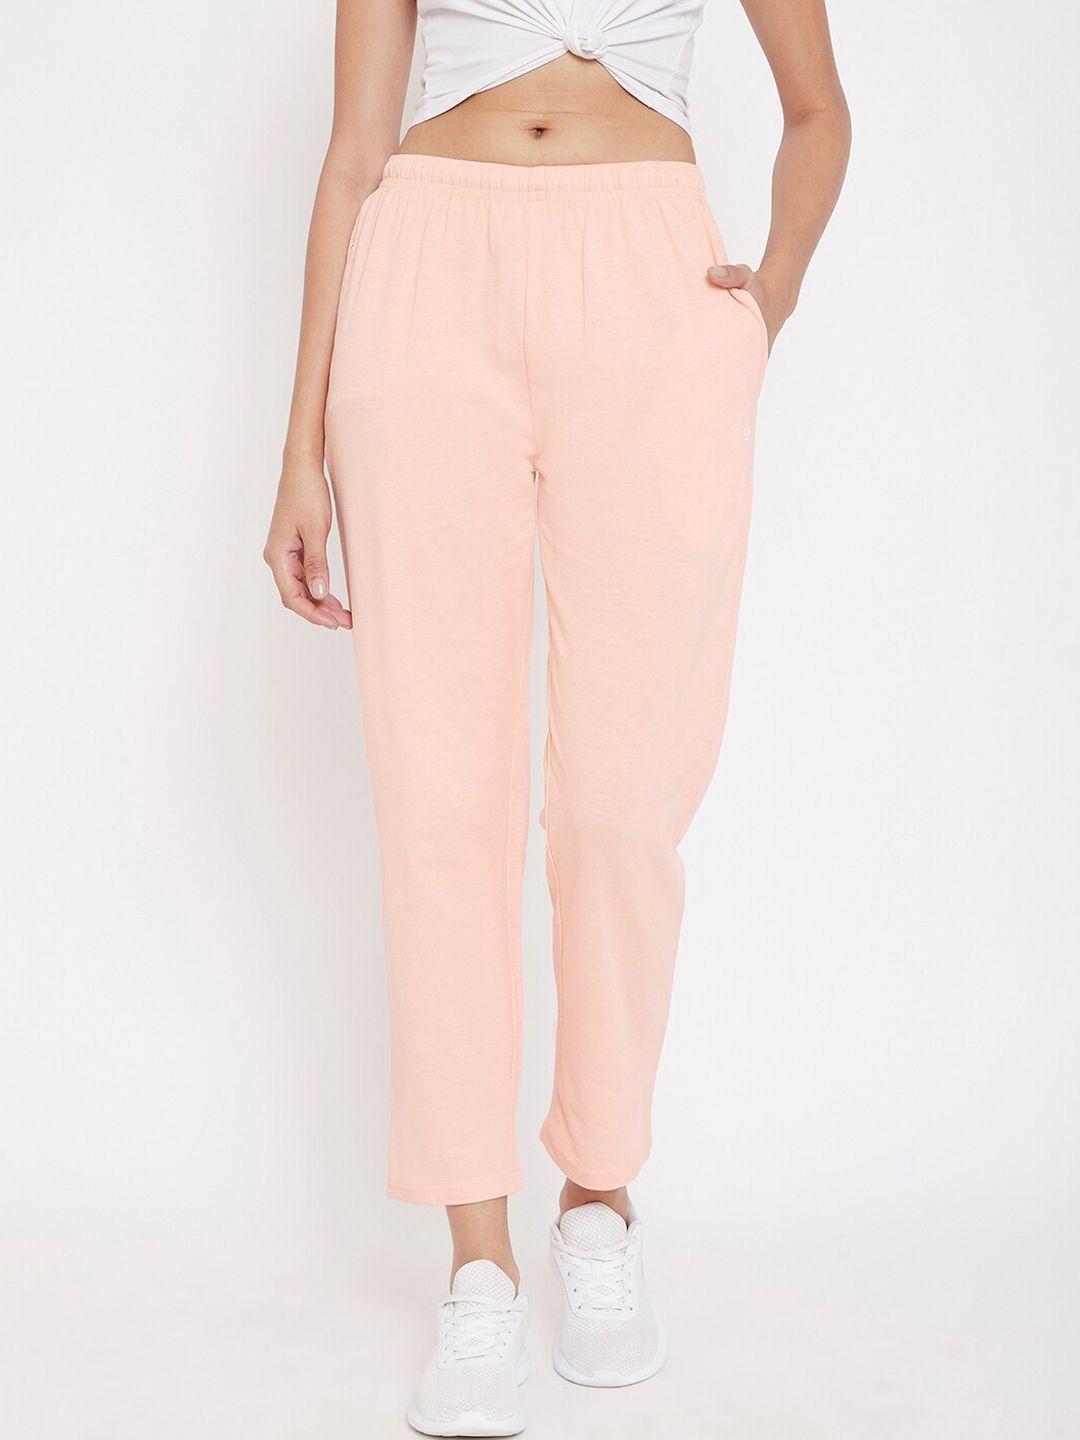 okane-women-peach-coloured-solid-comfort-fit-track-pants